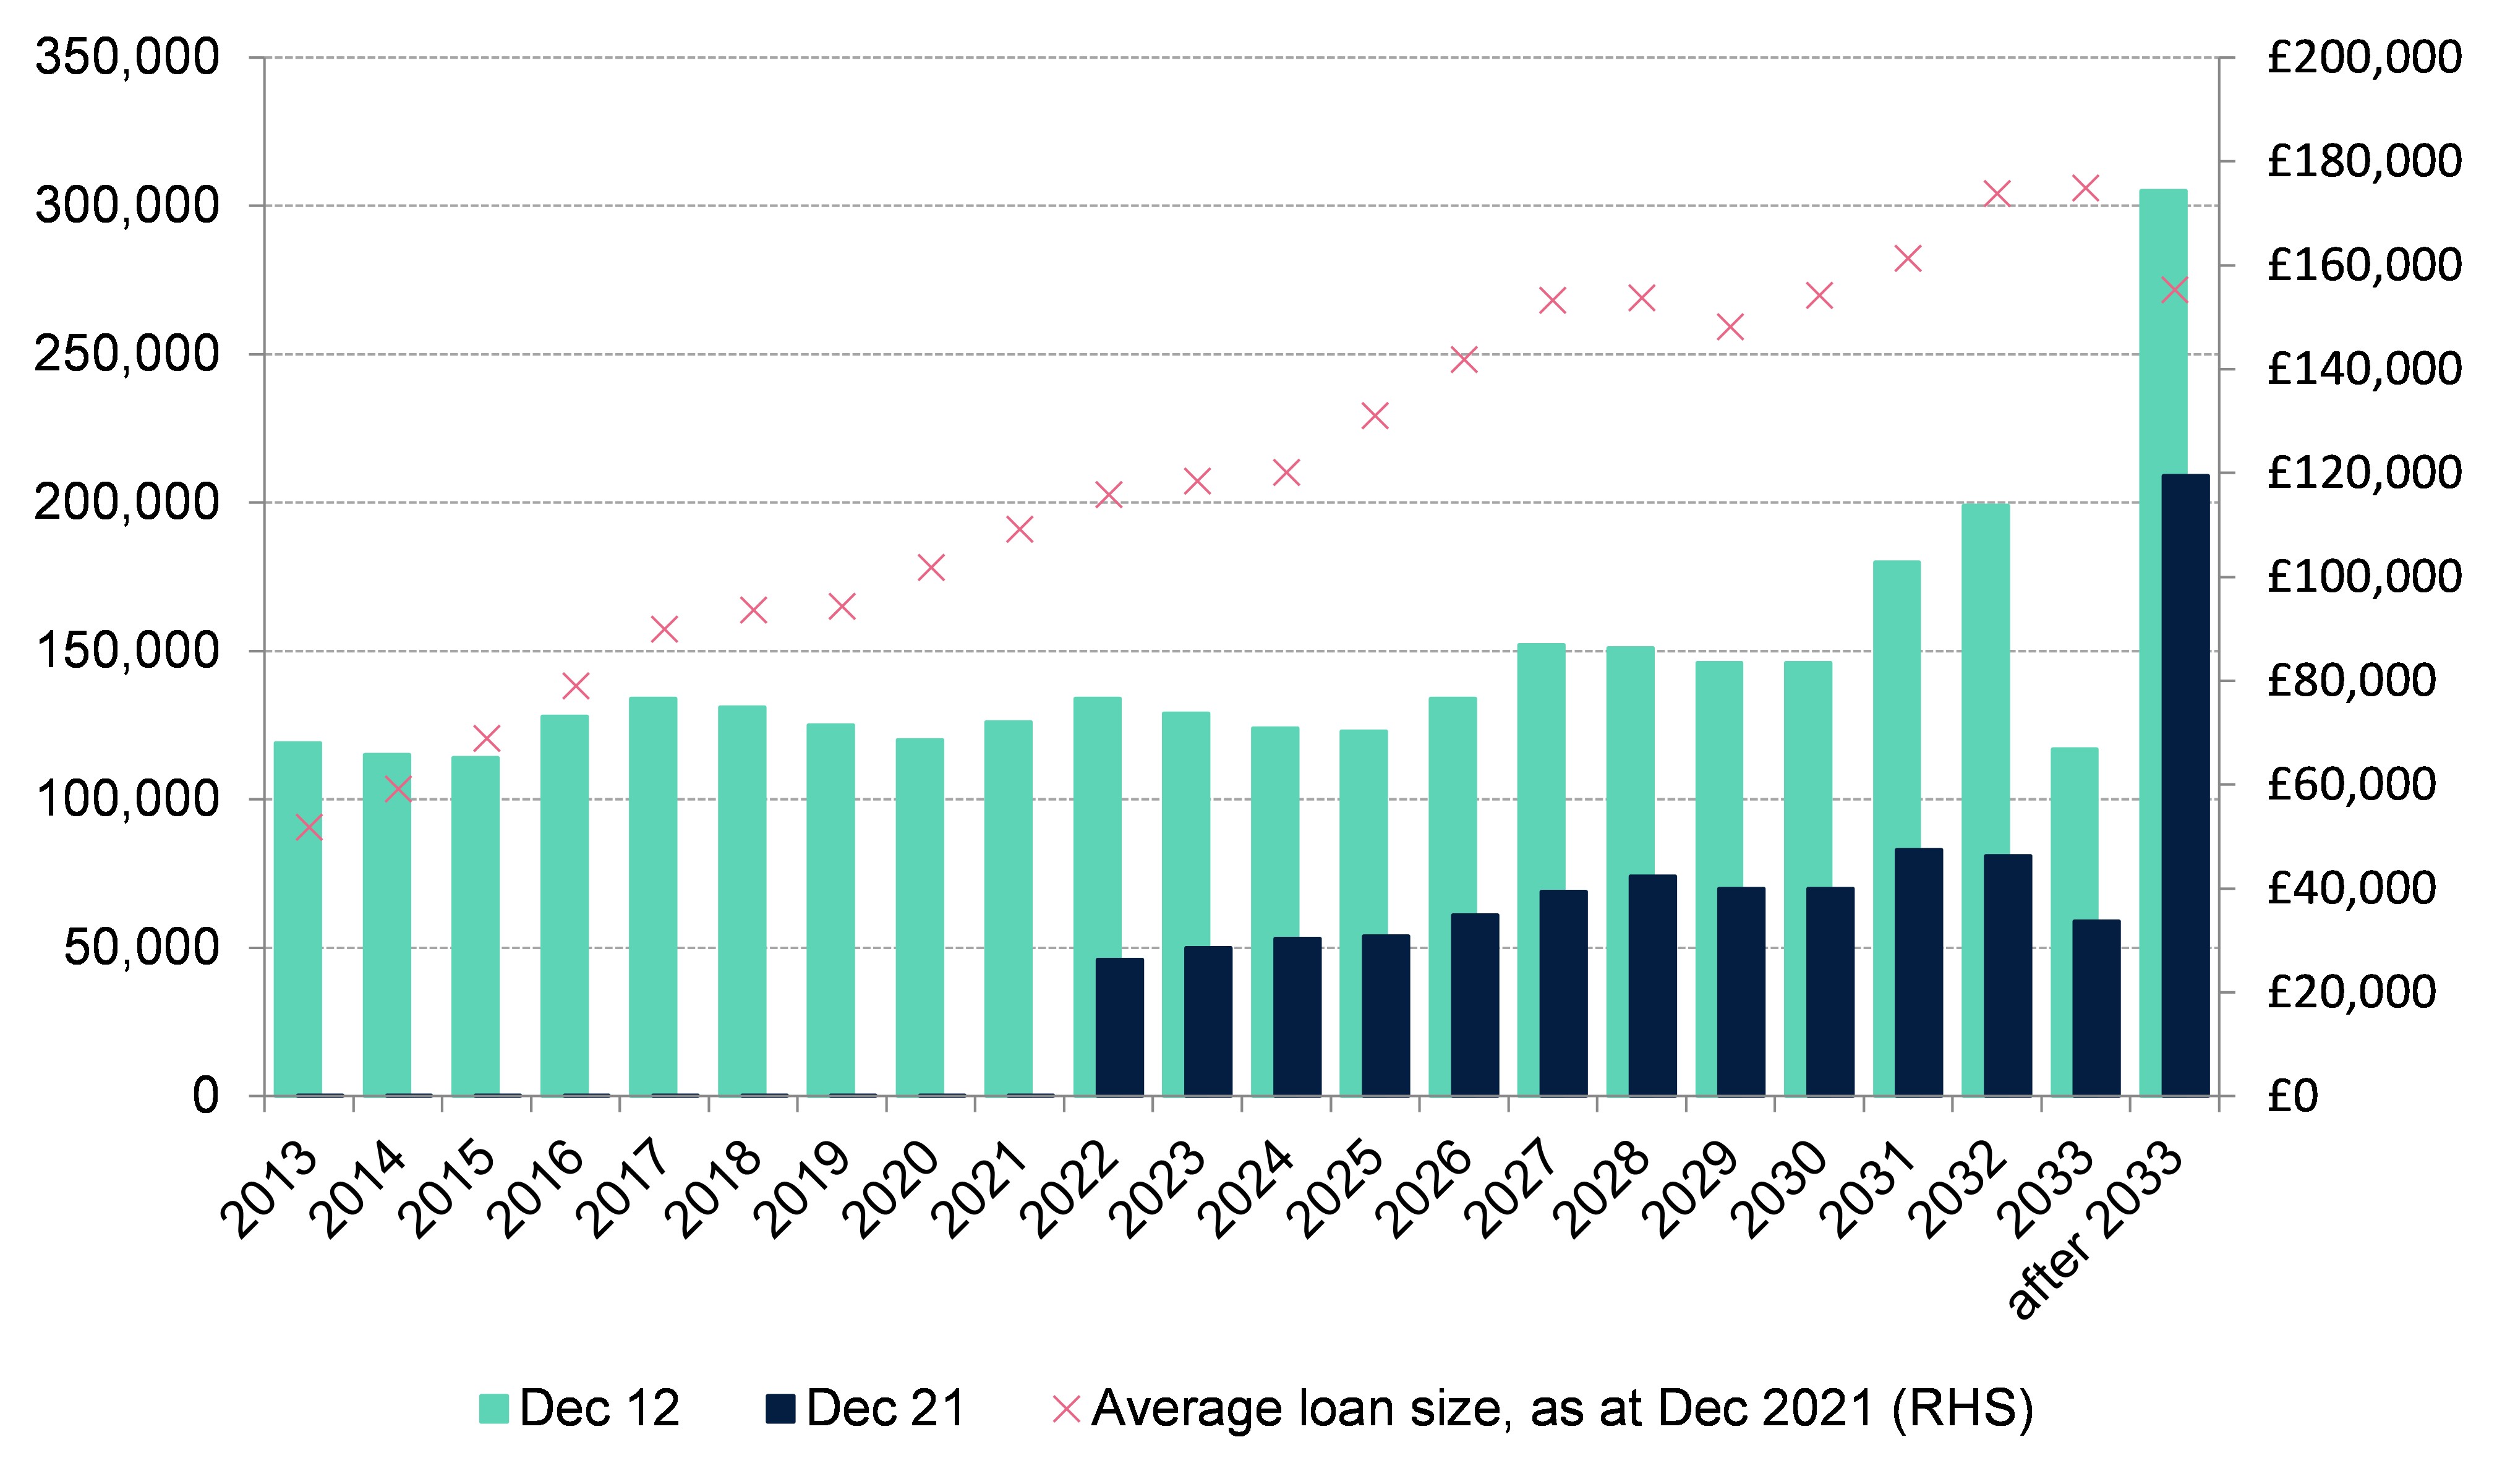 Chart 2: number of residential interest-only mortgages outstanding by maturity date, position at end of 2012 and 2021